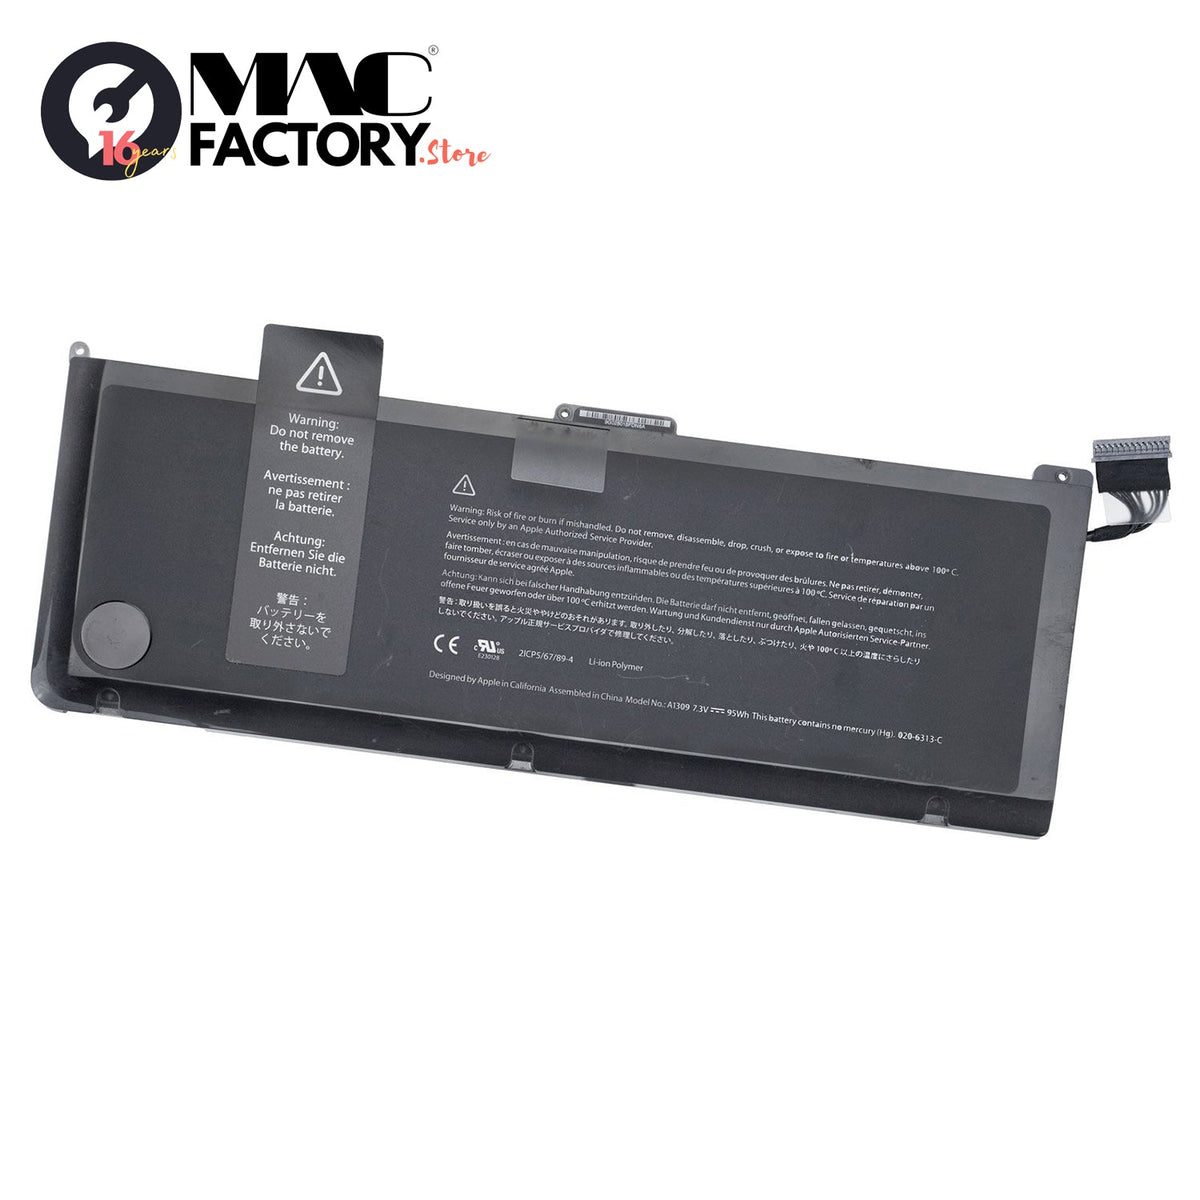 Avance A1309 7.3V/95W 11200MAH Battery for Apple MacBook Pro Unibody 17" A1297 EARLY 2009 MID 2010